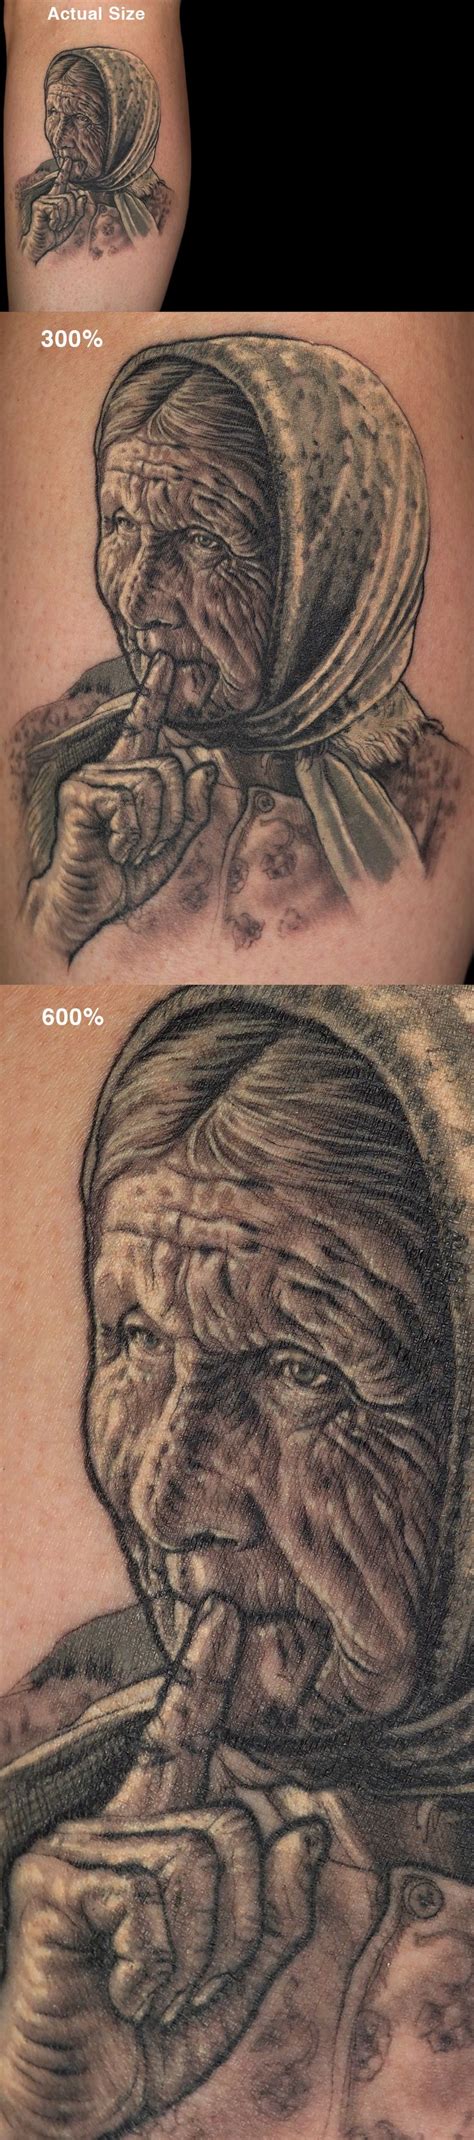 Discover, collect and share inspiration from a curated collection of tattoos by gejmr 1009. Shhhhh.jpg (1009×4557) | Tattoo artists, Portrait